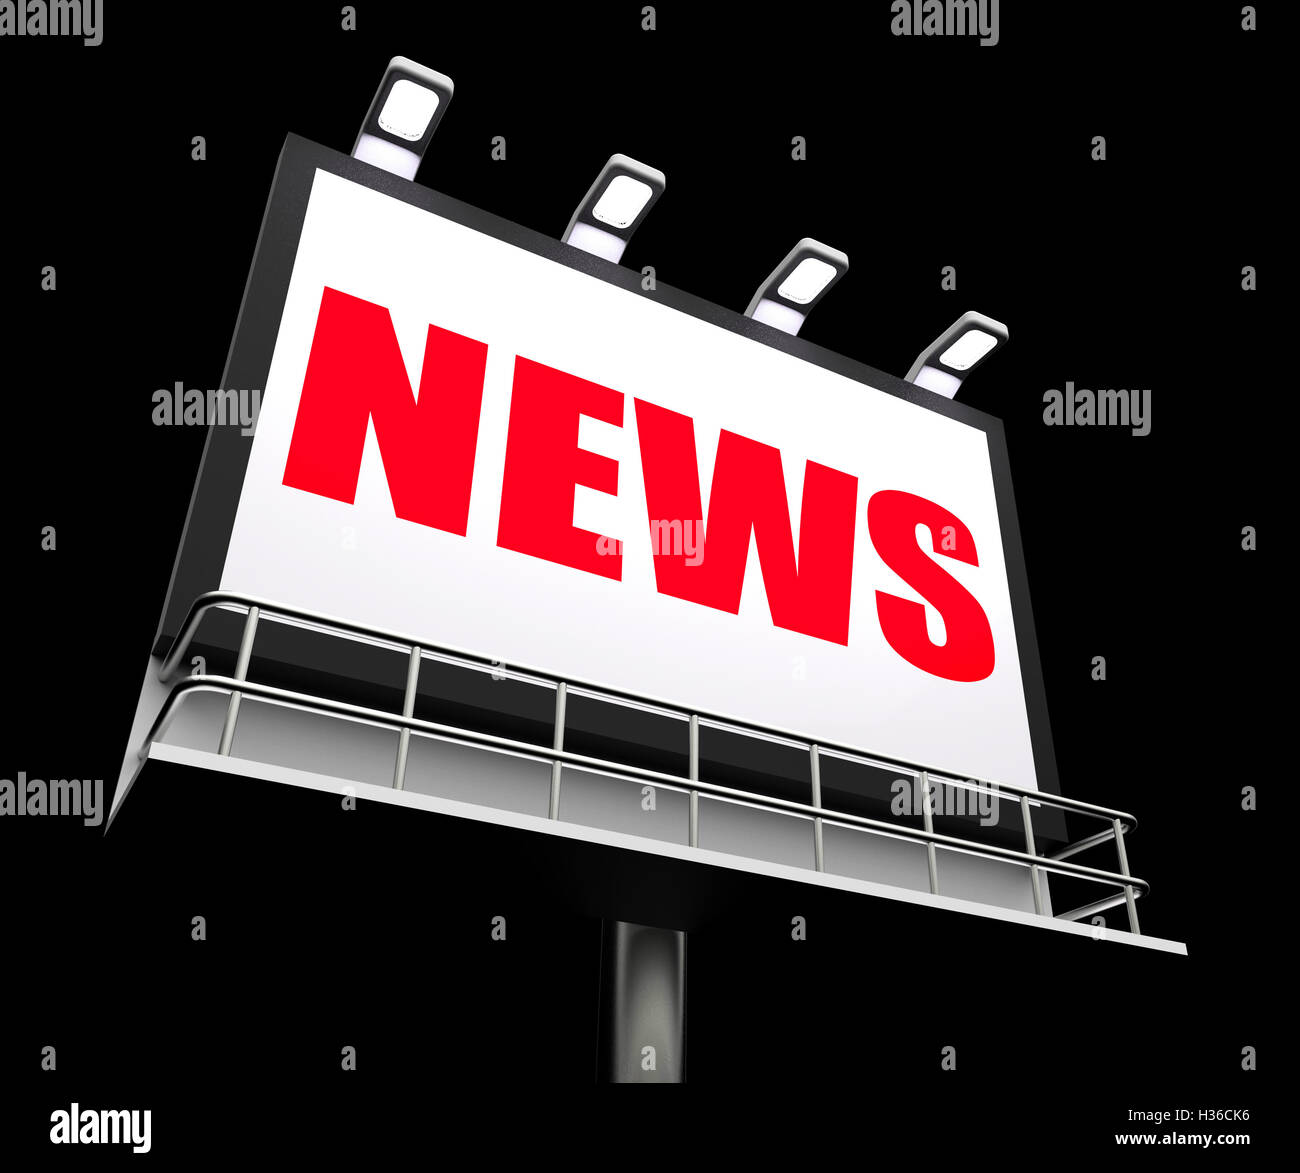 News Sign Represents Newspaper Articles and Headlines or Media I Stock Photo